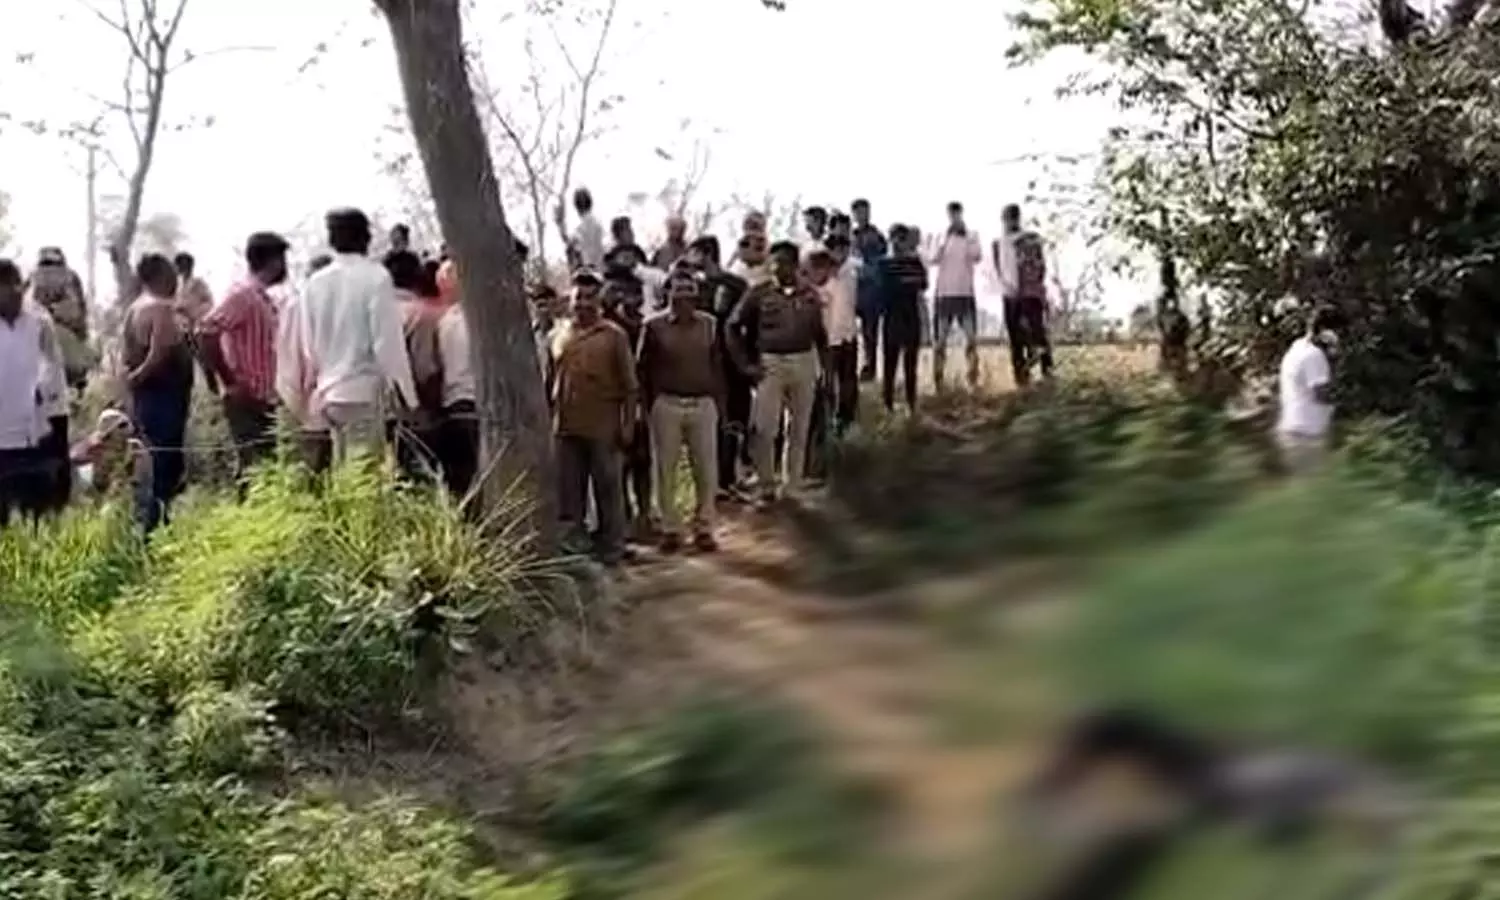 Sensation spread after the dead body of a young man was found in Kannauj, police engaged in investigation